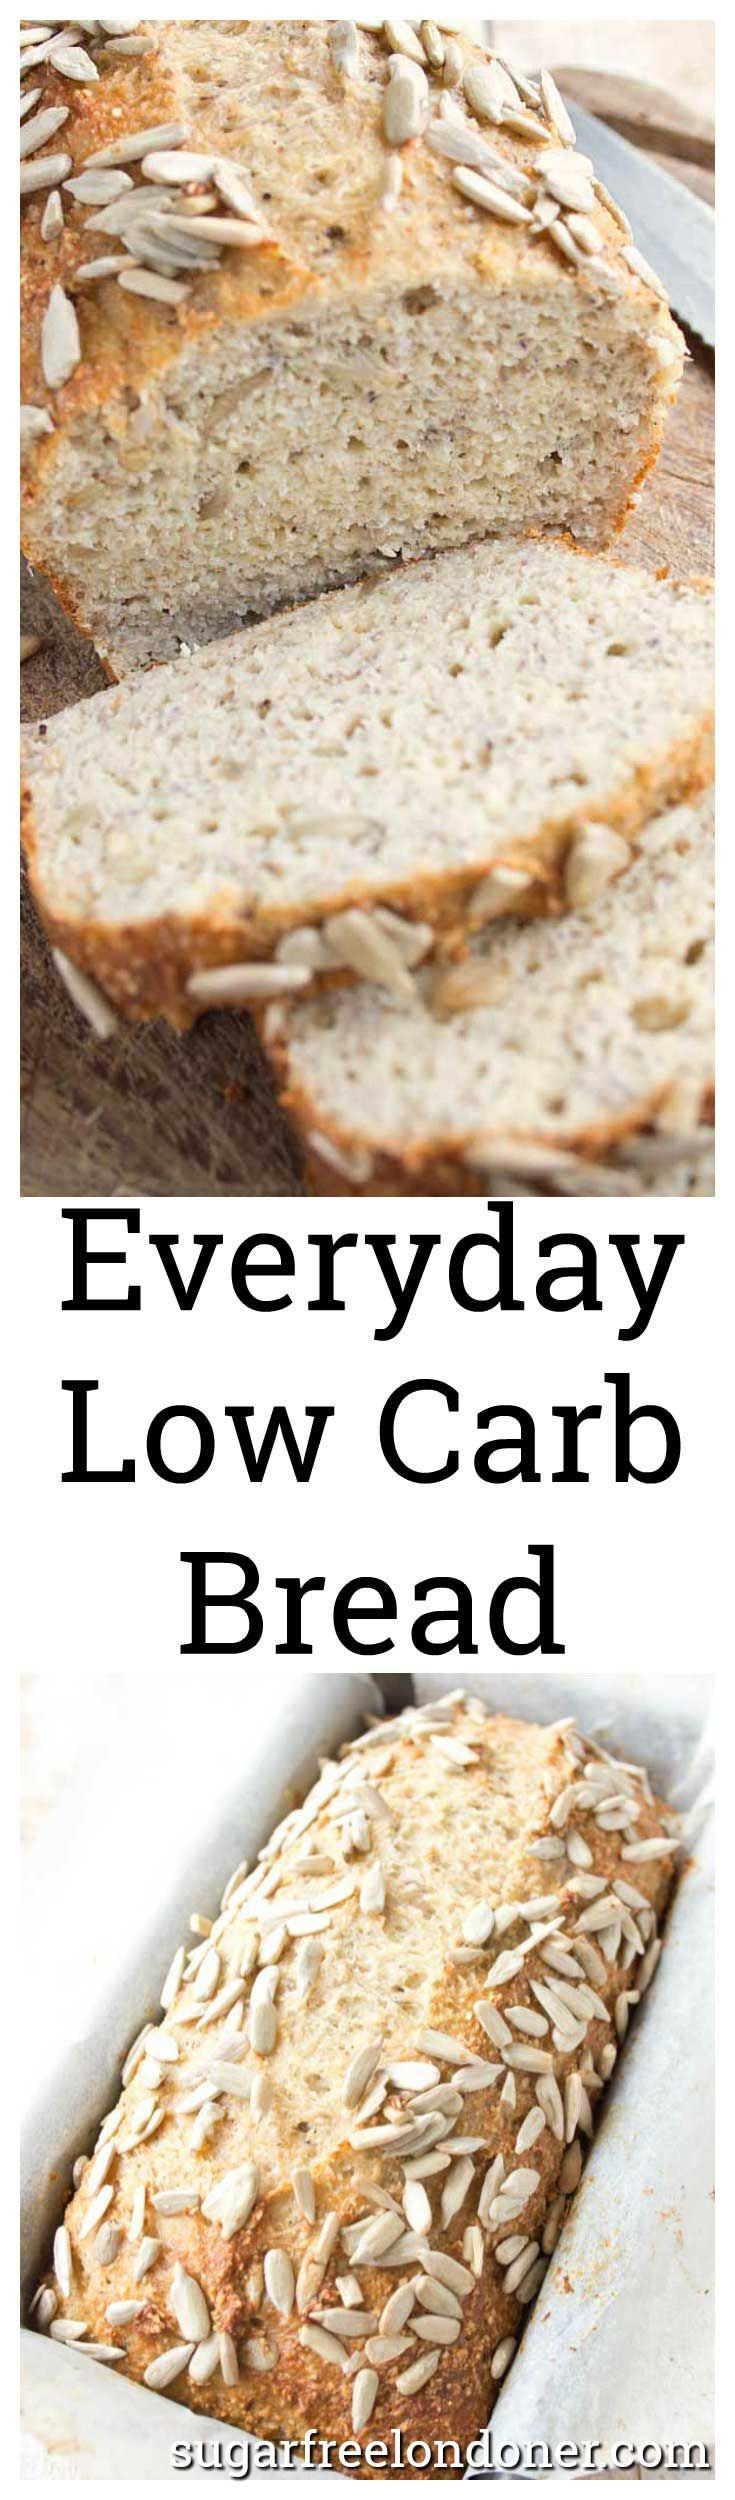 Whole Wheat Bread Low Carb
 An easy everyday low carb bread with a texture just like